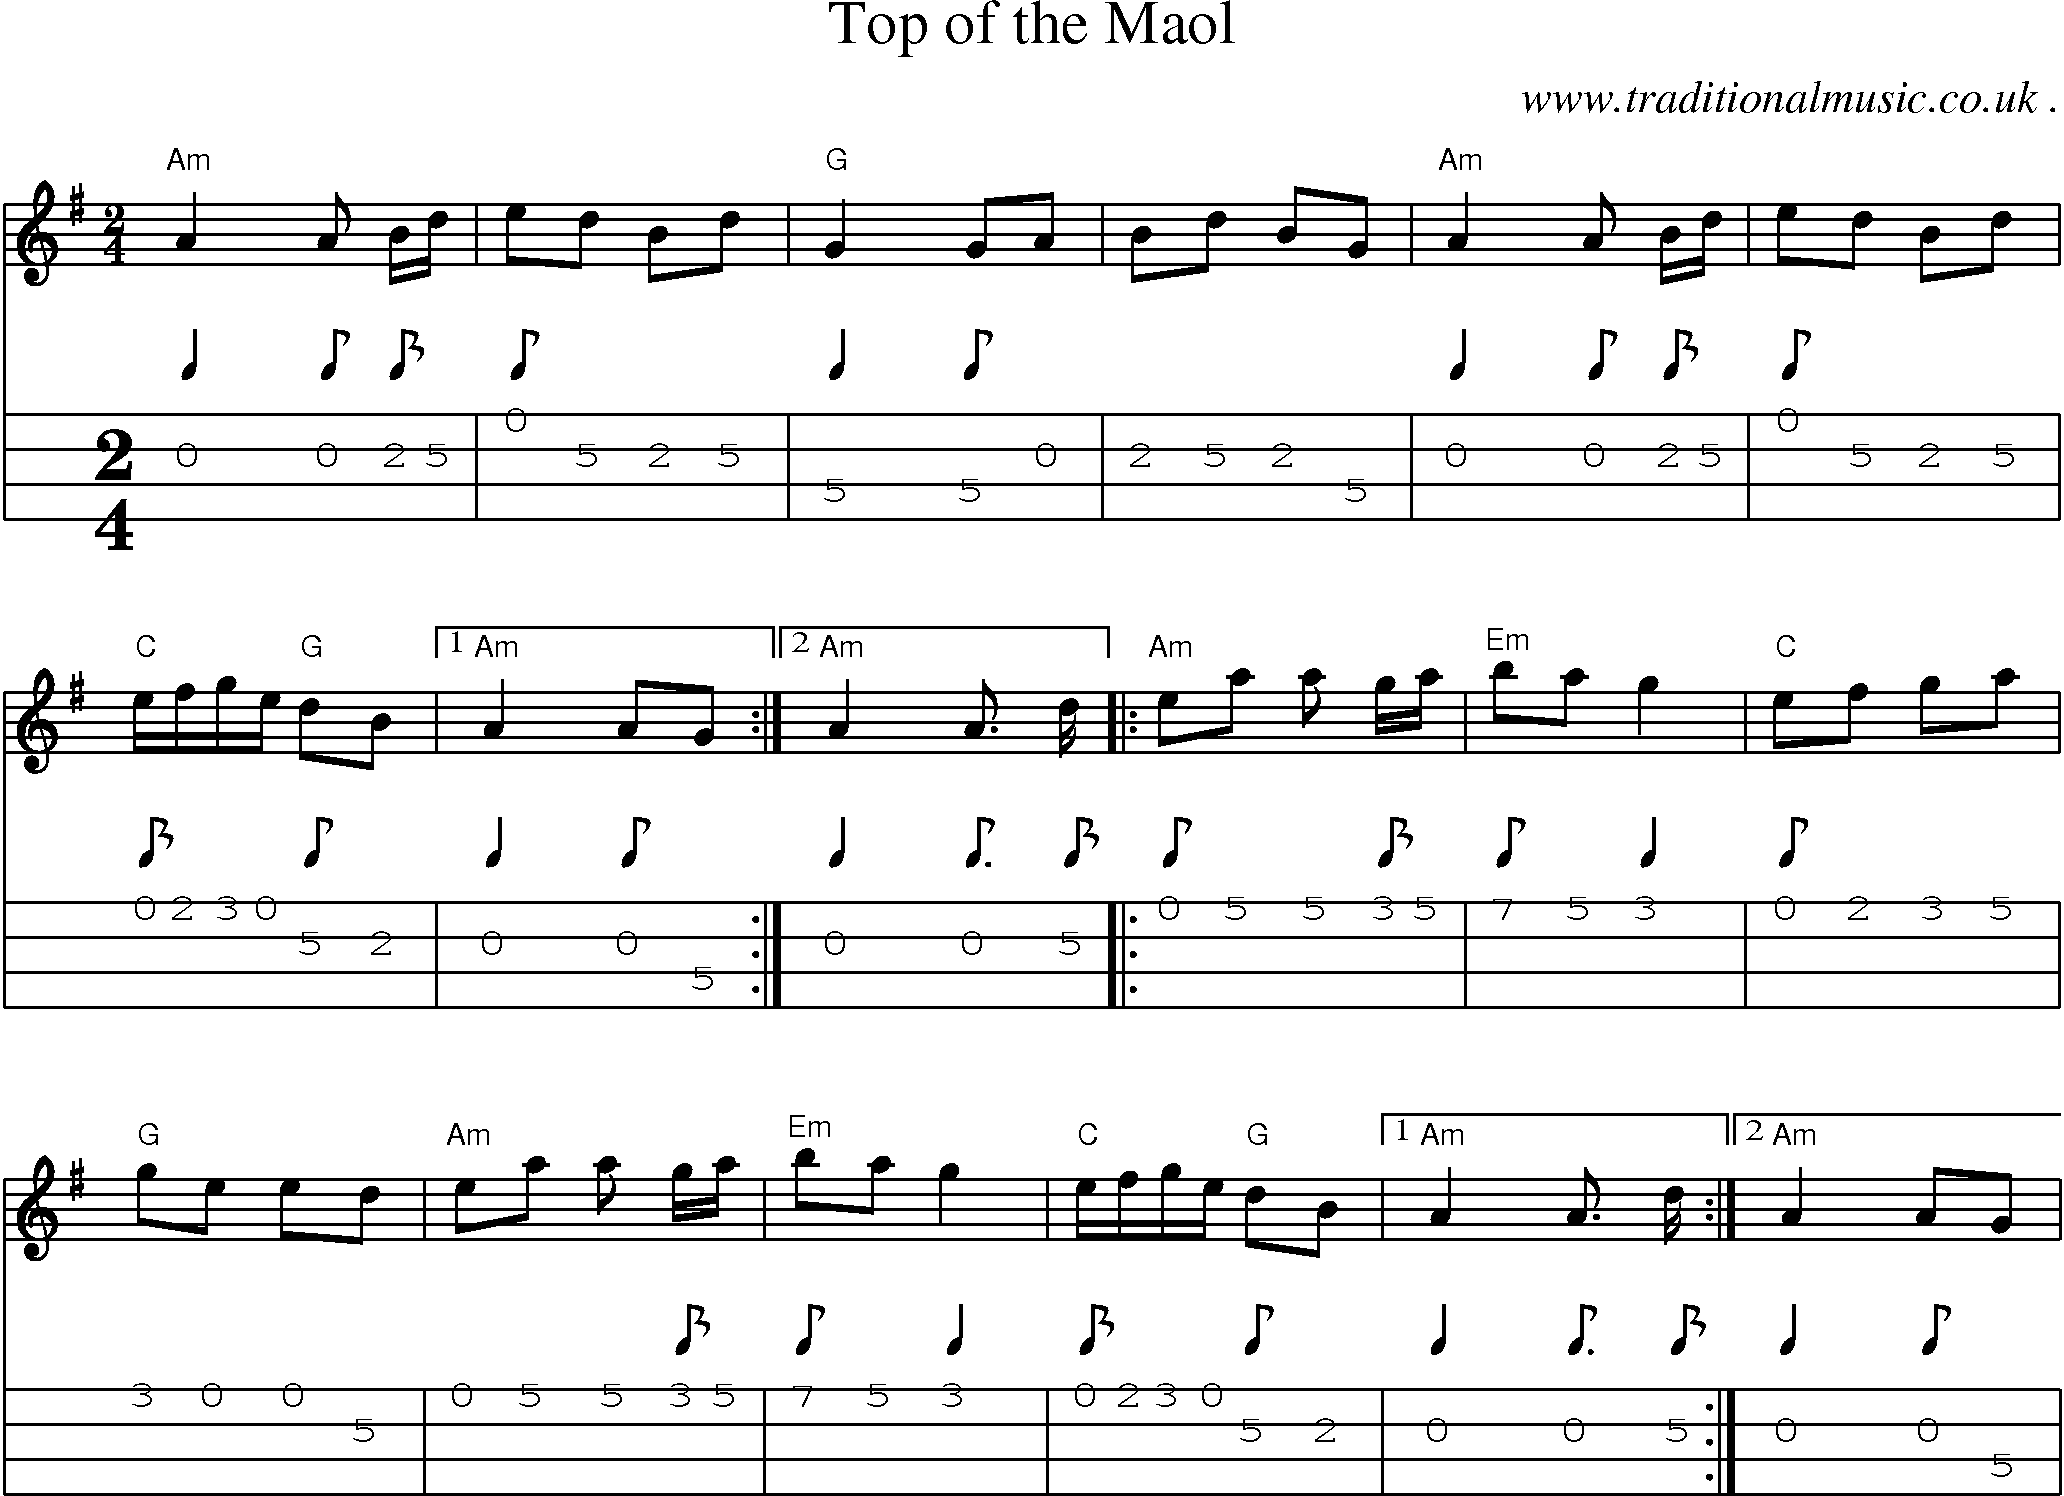 Music Score and Guitar Tabs for Top Of The Maol